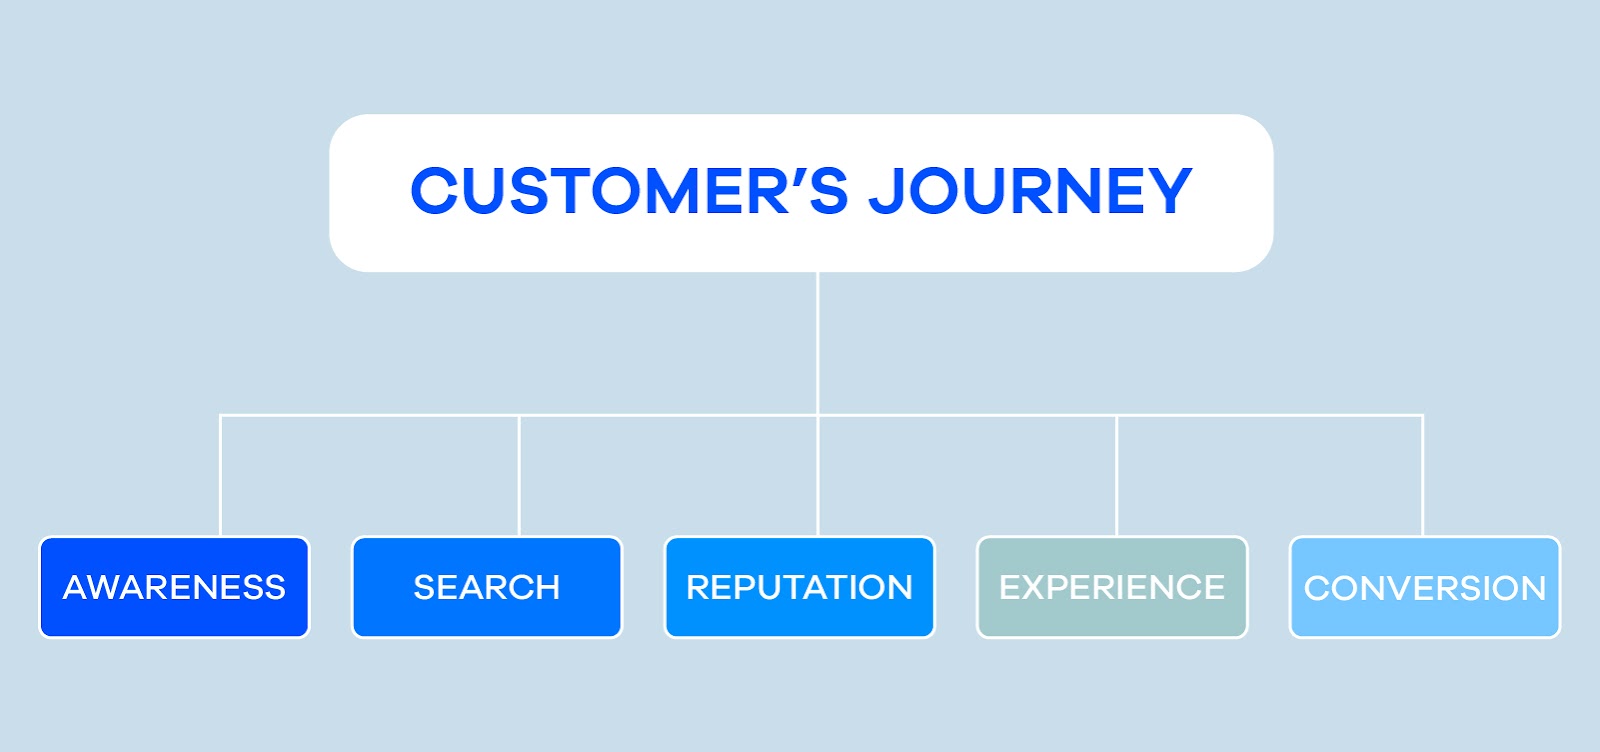 Here Is An Image Of A Customer's Journey Map